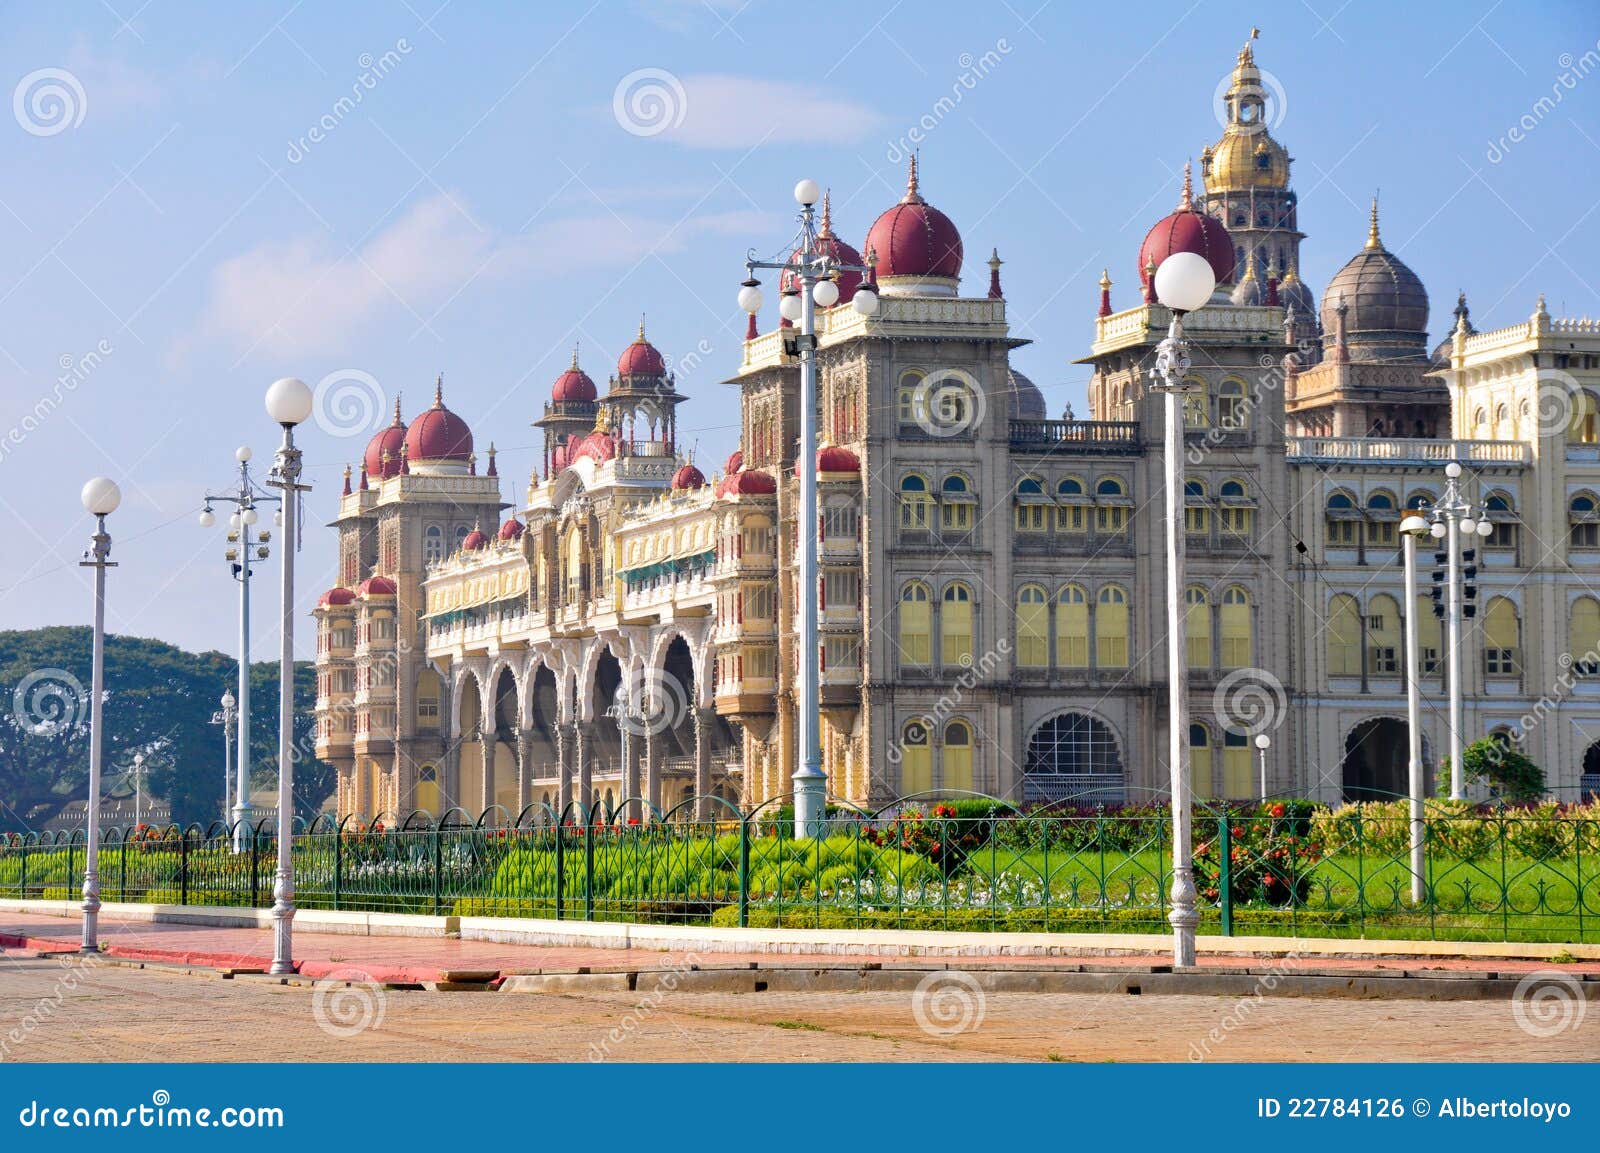 the mysore palace in india